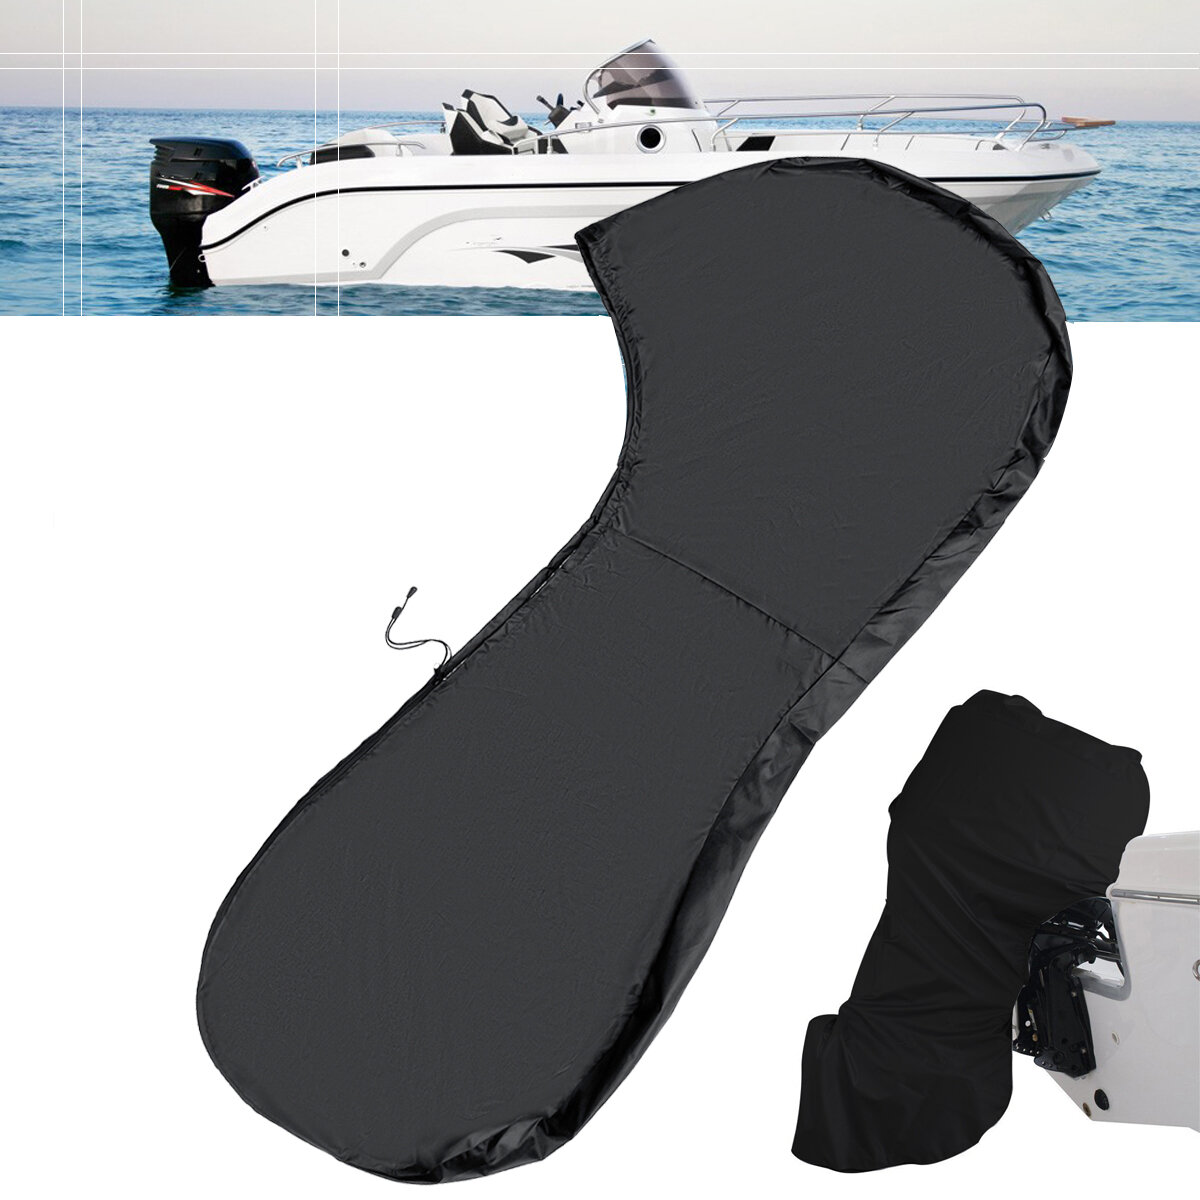 420D Oxford Outboard Engine Boat Cover Waterproof Dust-proof Protector Cover for 6-15HP Boat Motors